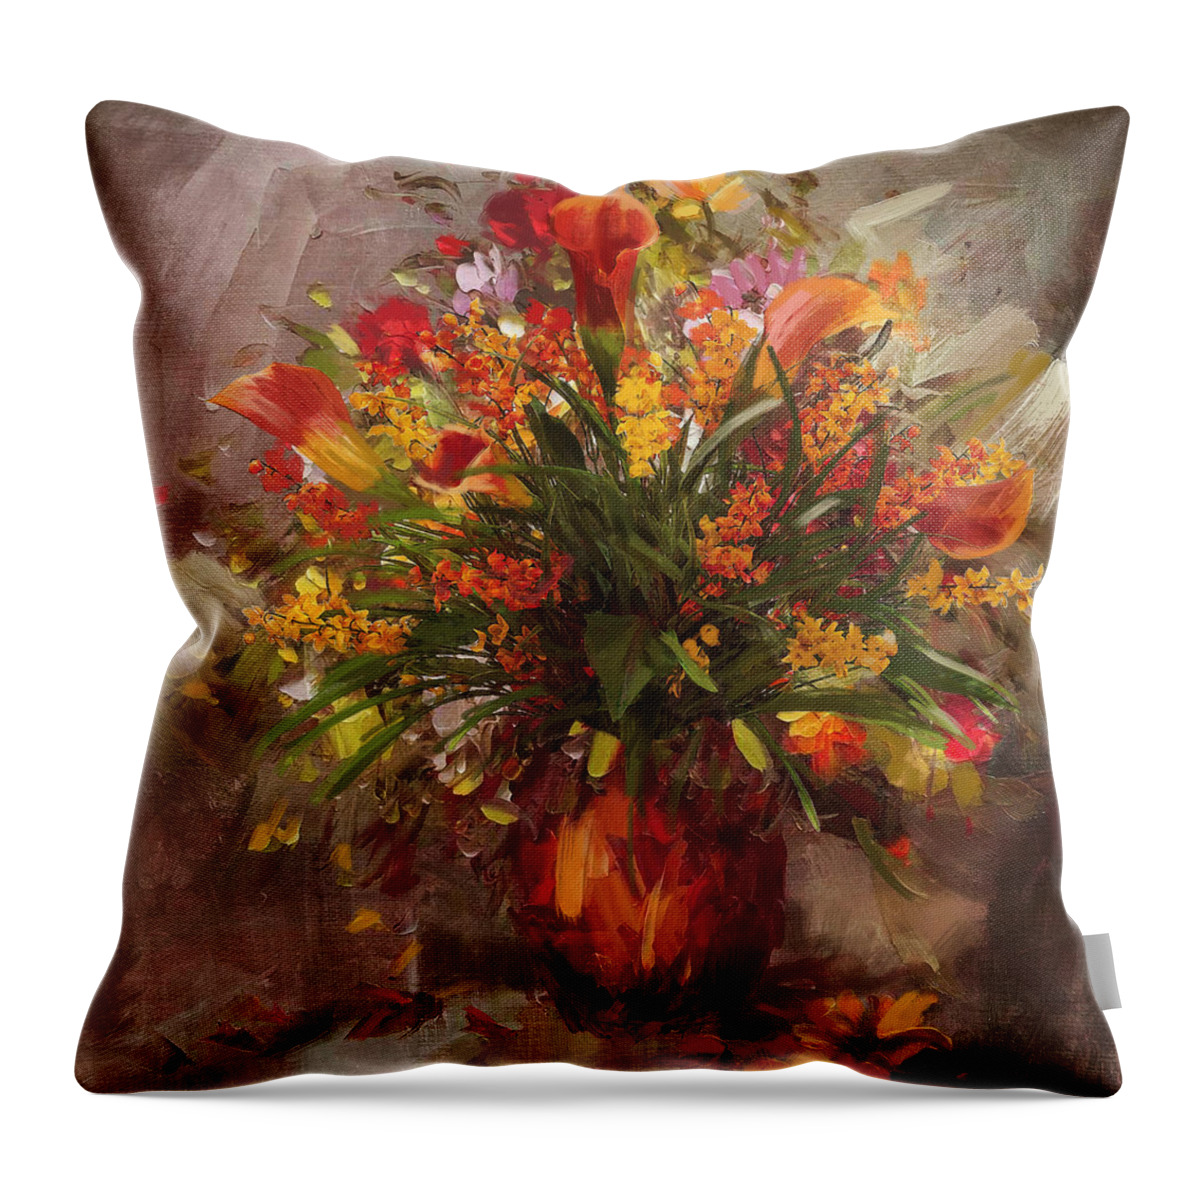 Flower Throw Pillow featuring the painting Floral 8 by Mahnoor Shah